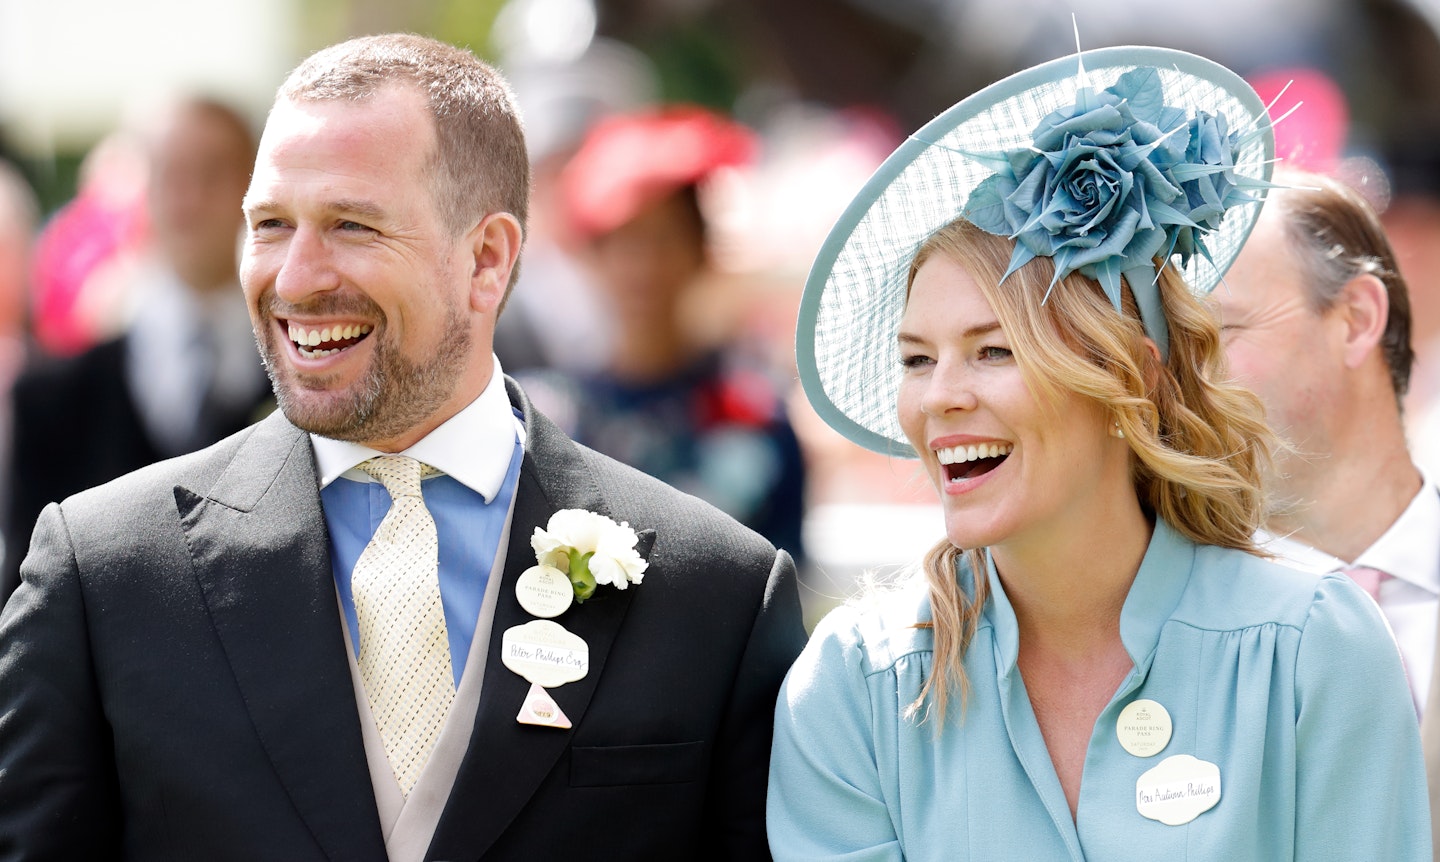 It's Rumoured That Autumn Phillips Will Return To Canada After Her Royal Divorce - How Do You Handle An International Custody Battle?